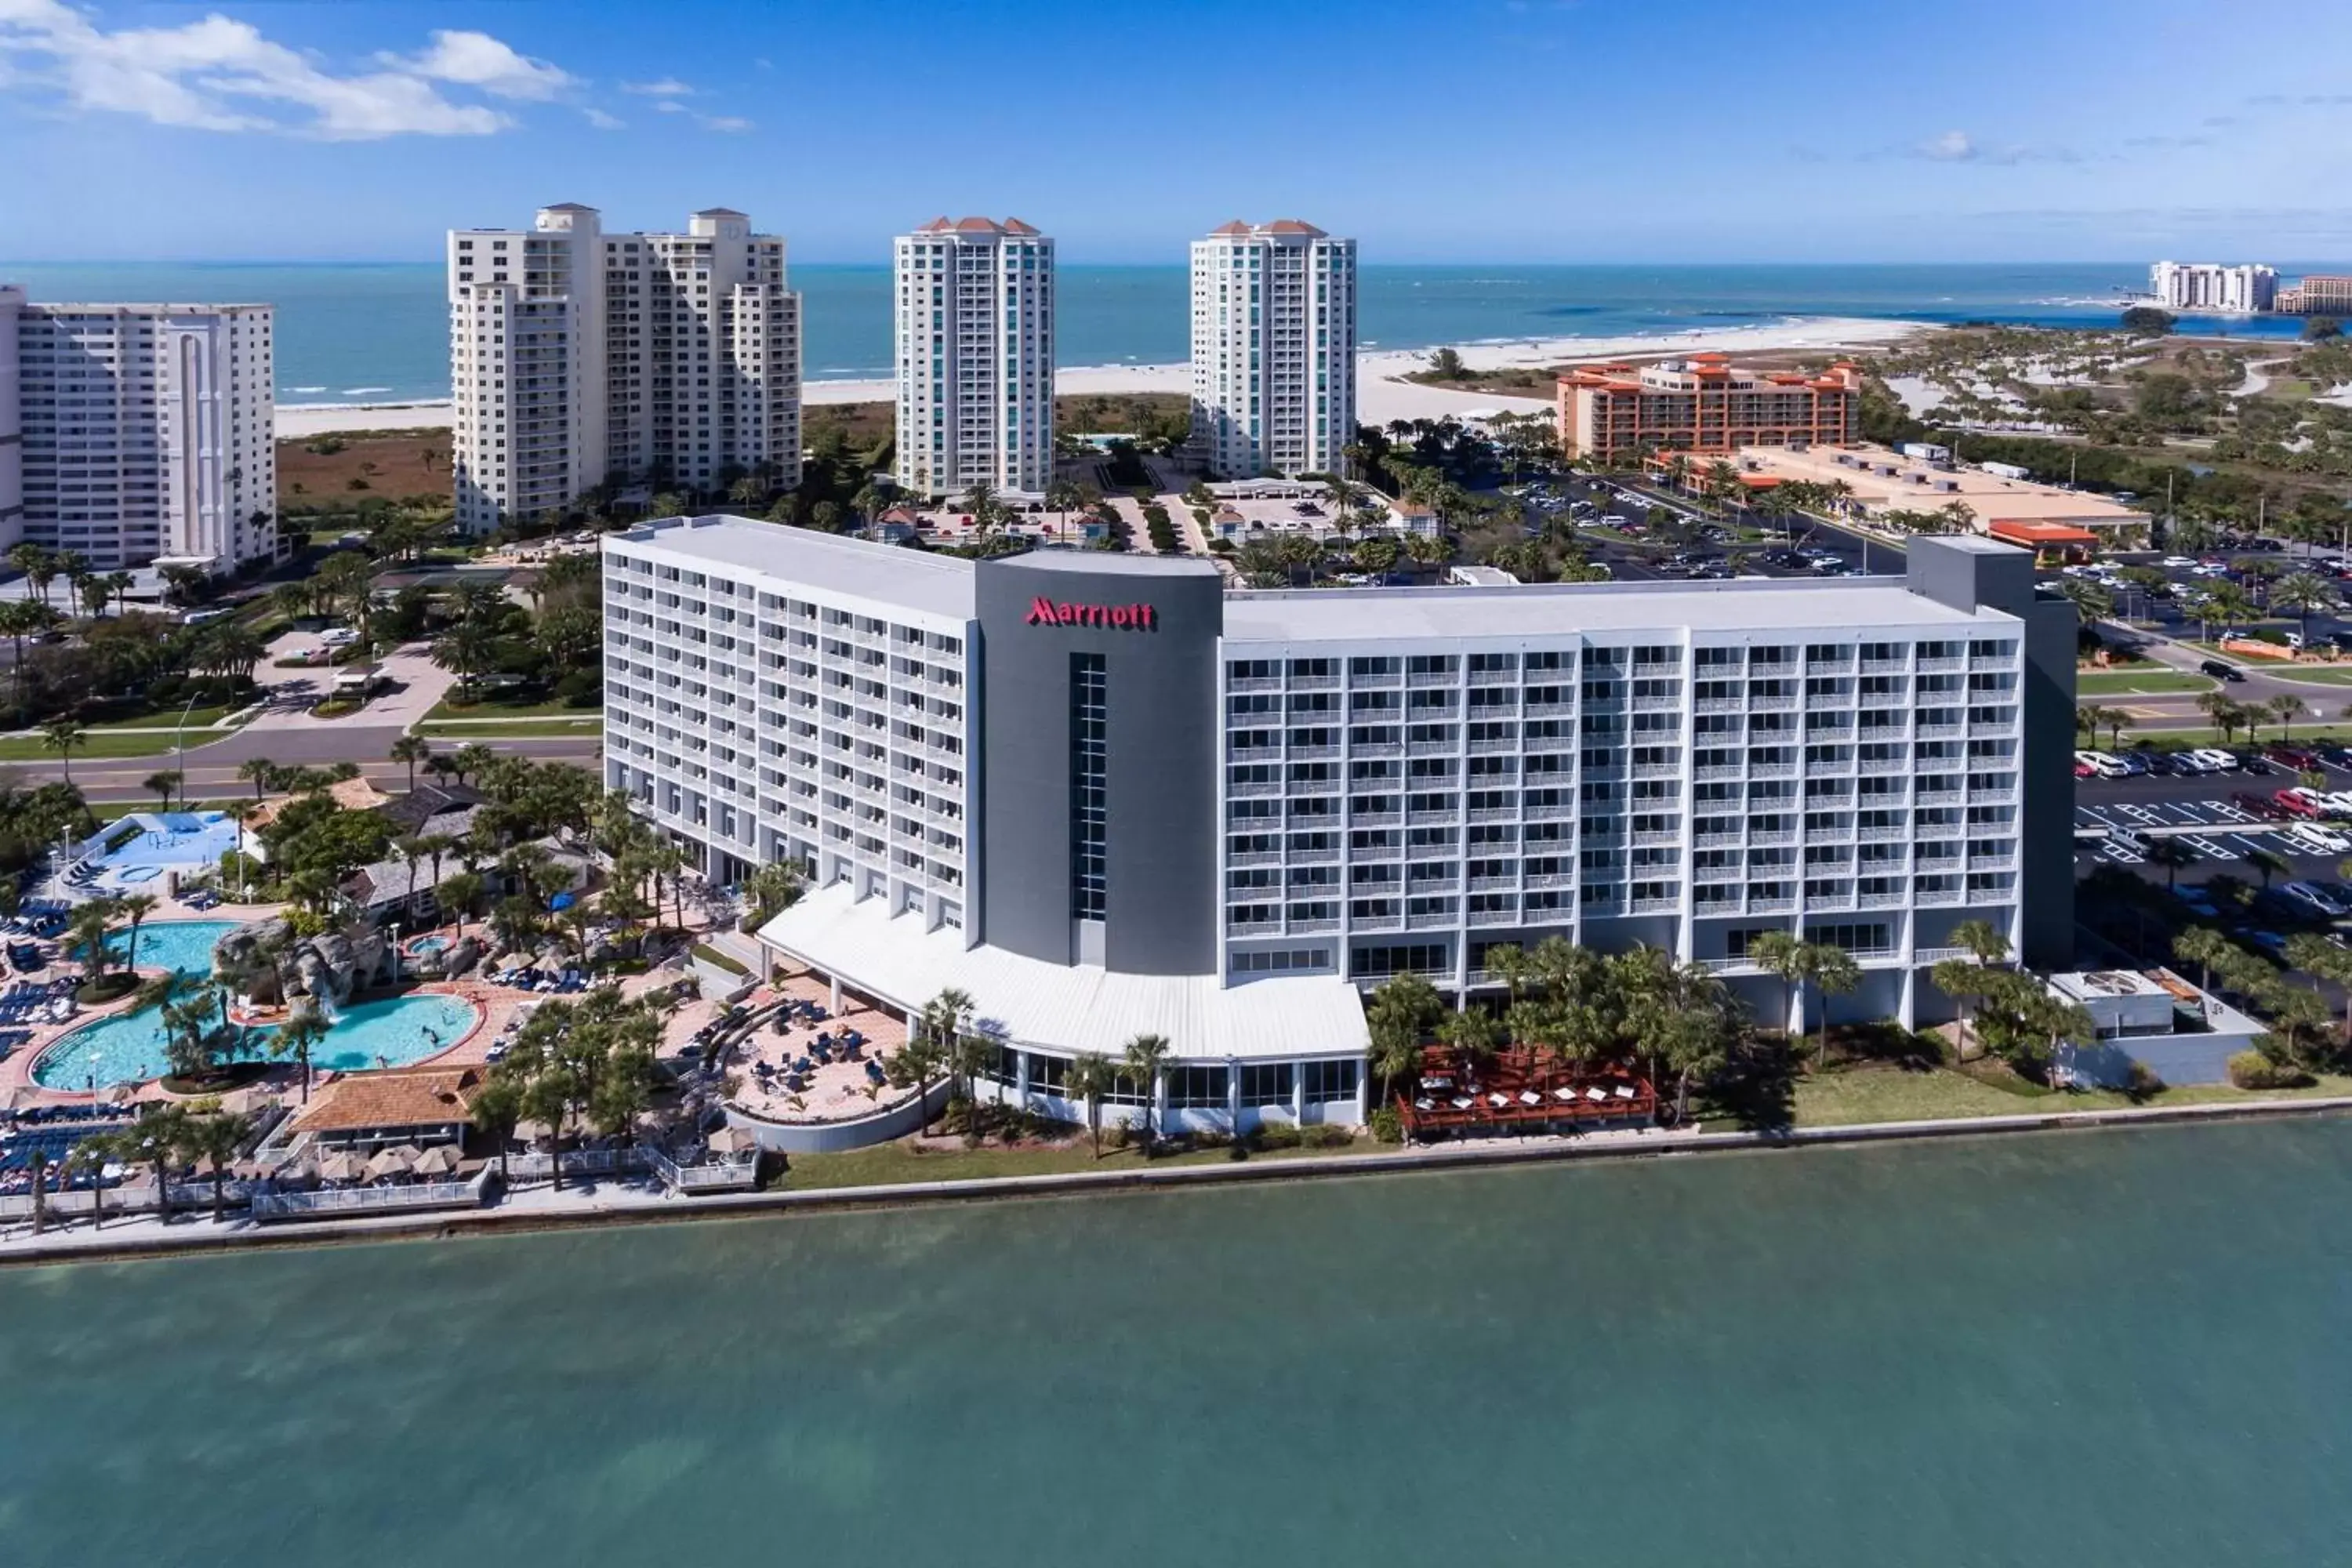 Property building, Bird's-eye View in Clearwater Beach Marriott Suites on Sand Key